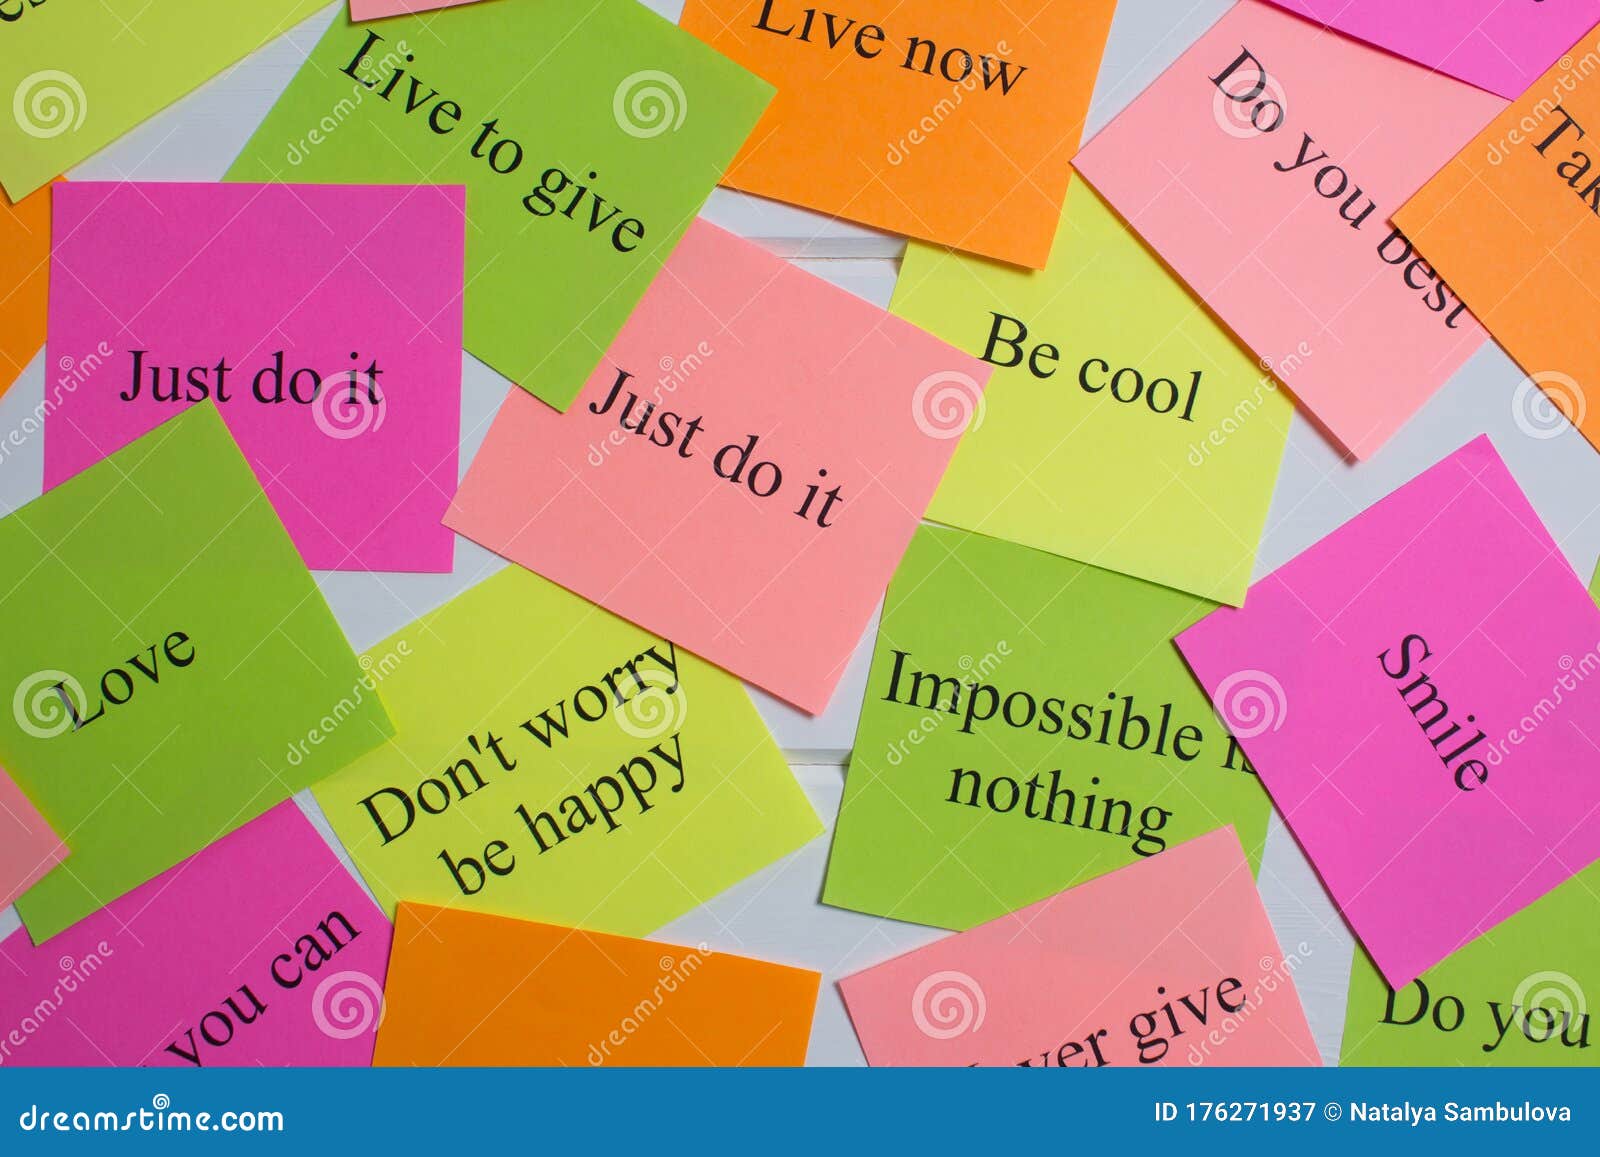 Motivational Words Colorful Stickers White Background Vision Board Cards  Words Stock Photo by ©NataliSammm 355988438